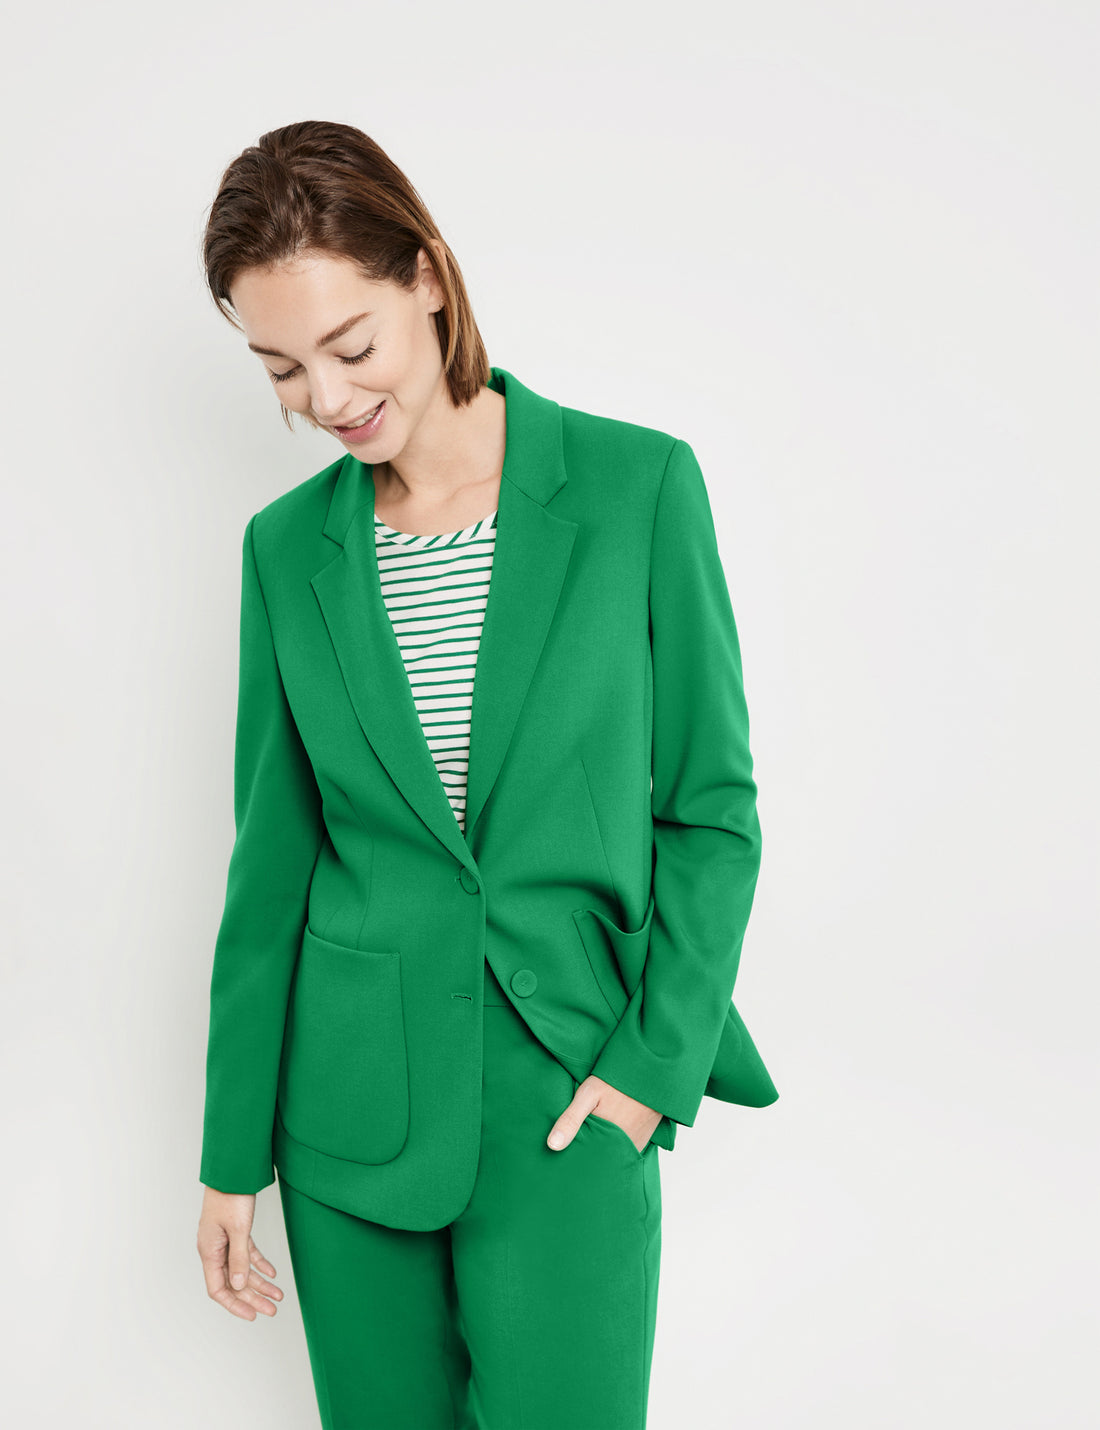 Blazer With Stretch For Comfort